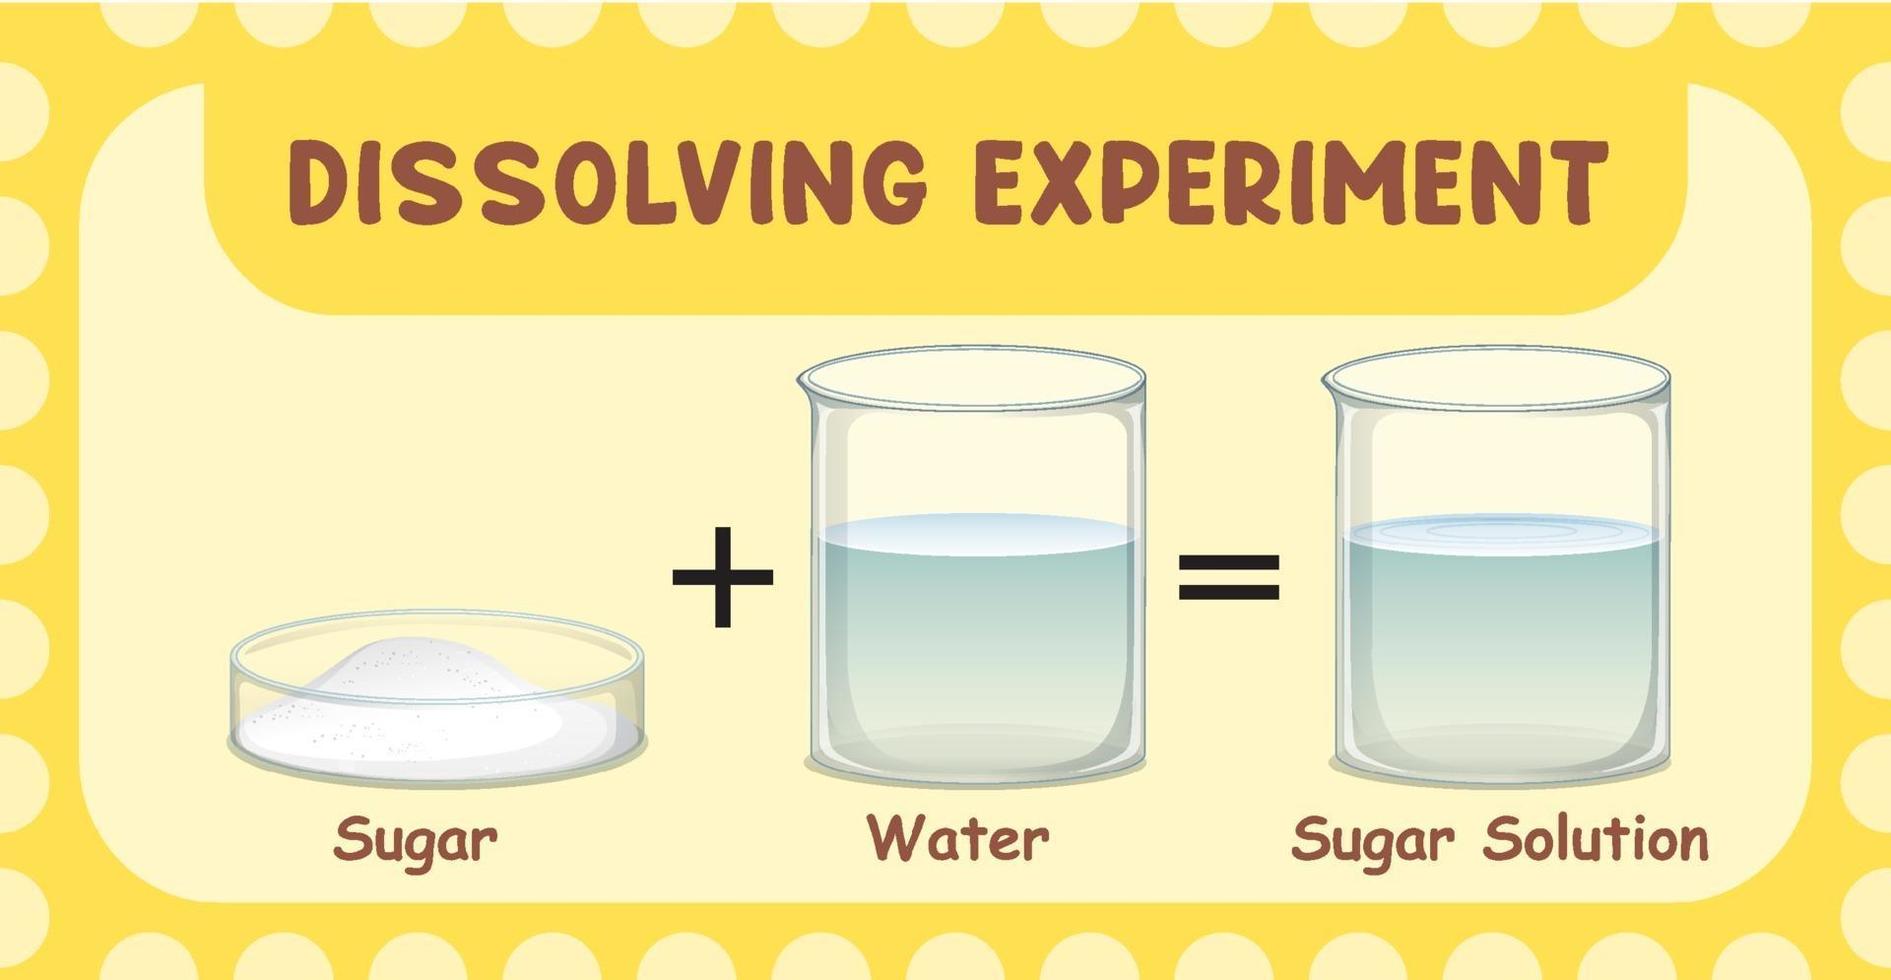 Dissolving science experiment with sugar dissolve in water vector